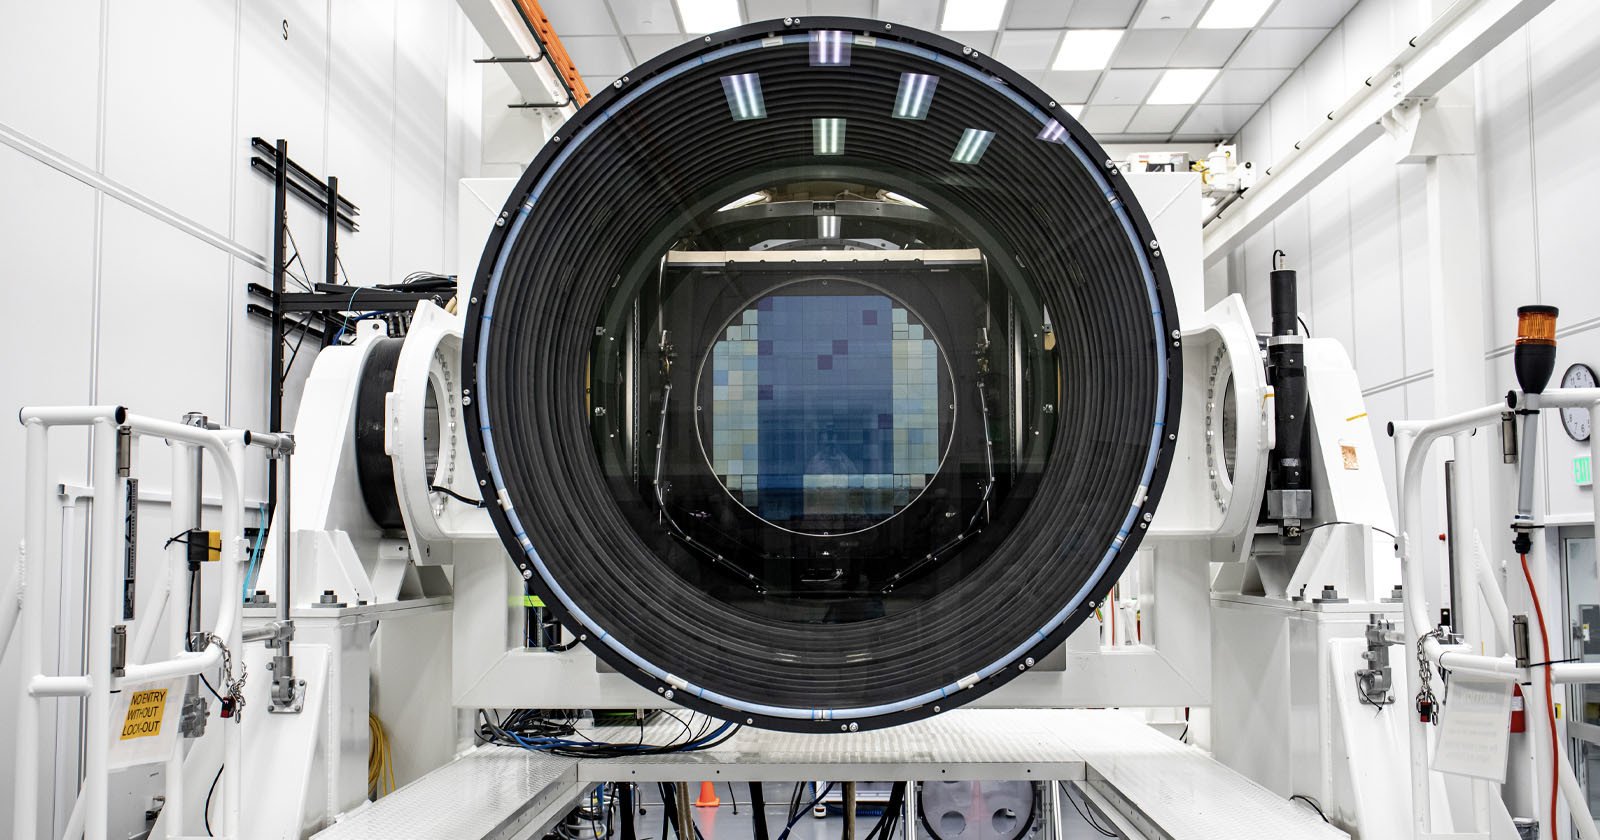 3,200 Megapixels: The Worlds Largest Camera is Almost Complete